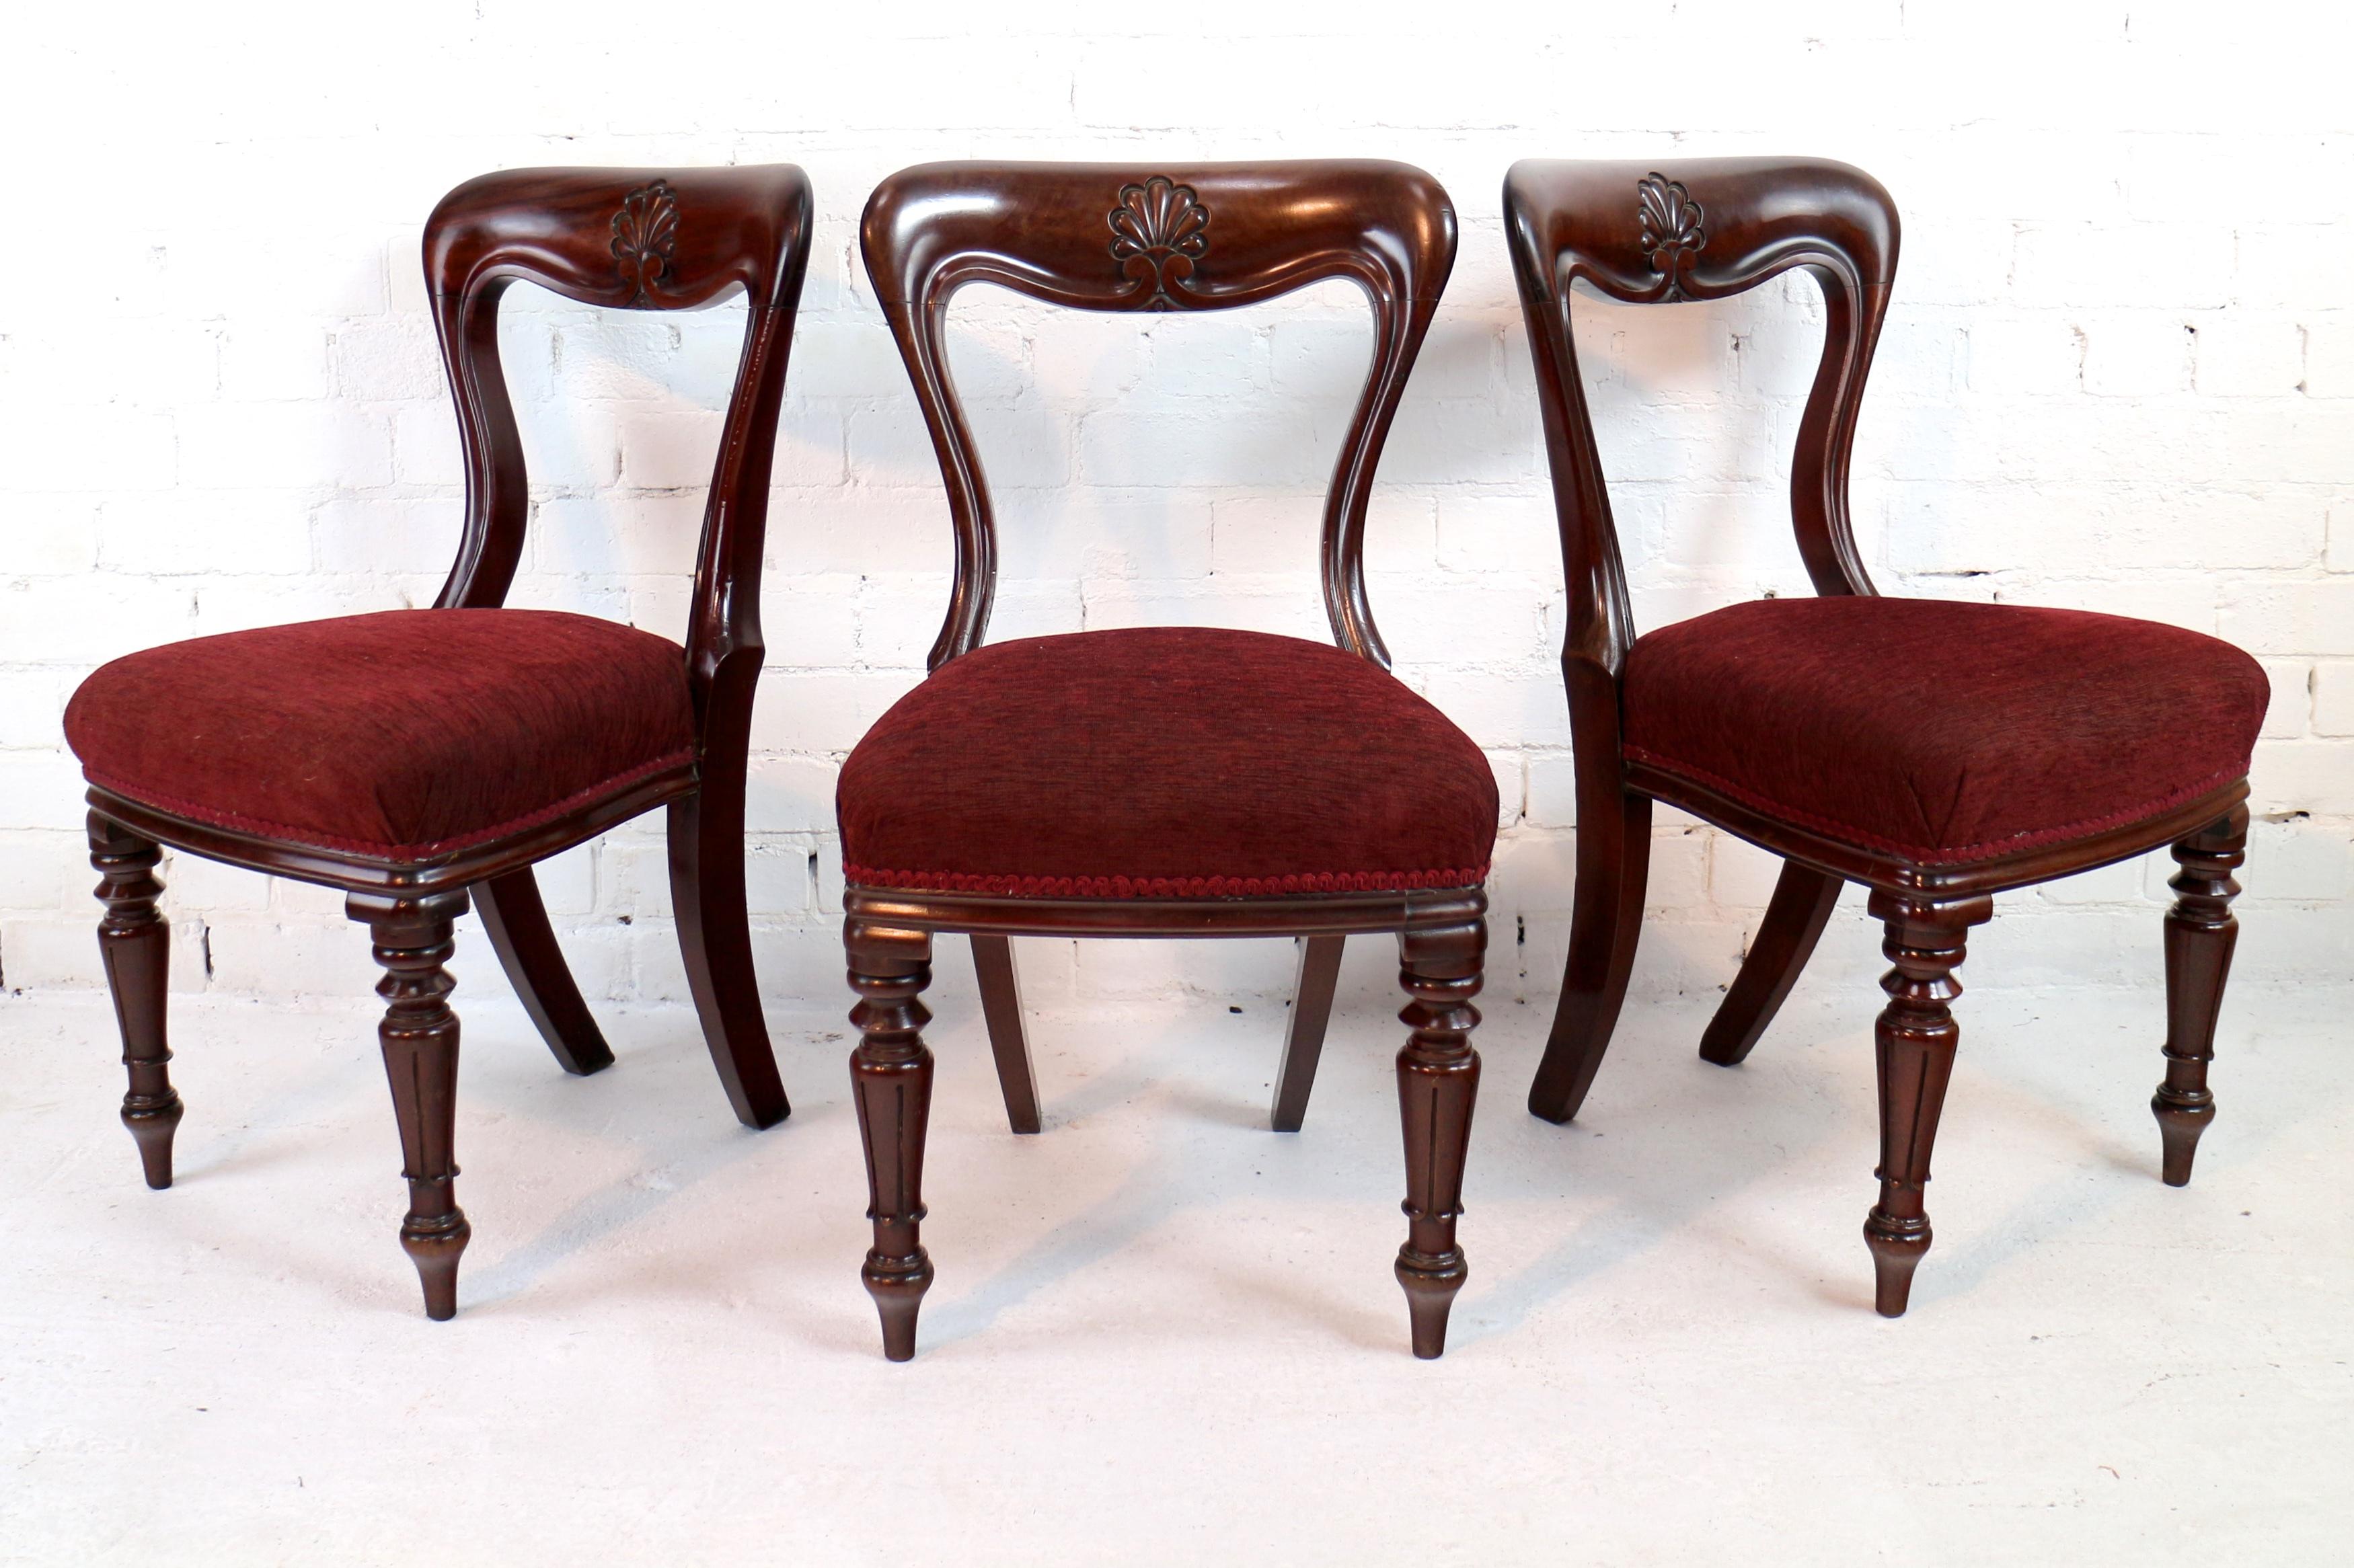 Set of 10 Antique English William IV Mahogany Dining Chairs by J Proctor In Good Condition For Sale In Glasgow, GB